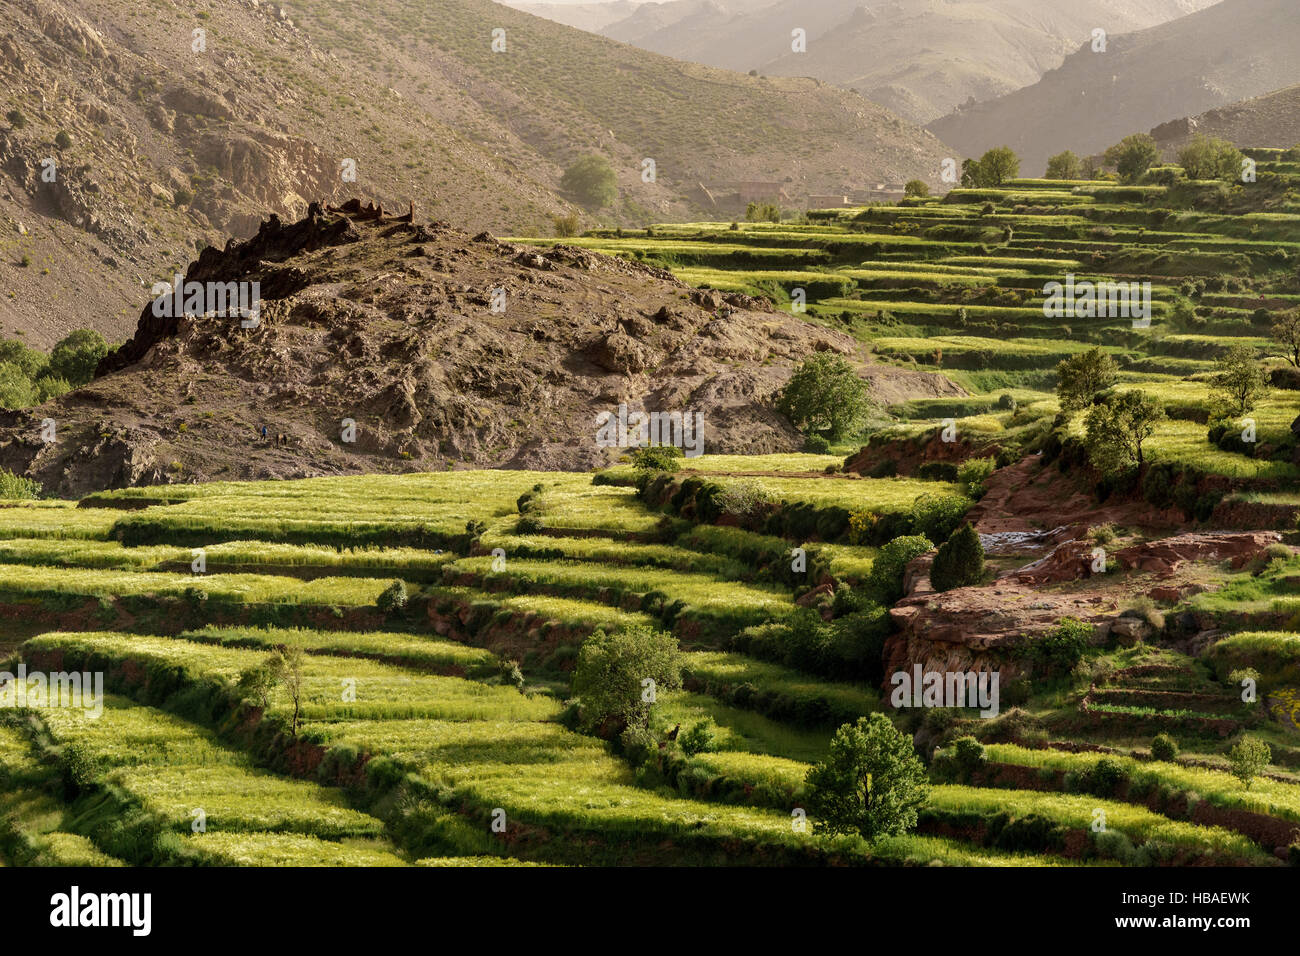 Landscape of terraces of cereal crops in the middle of the Atlas Mountains in Morocco at sunset Stock Photo